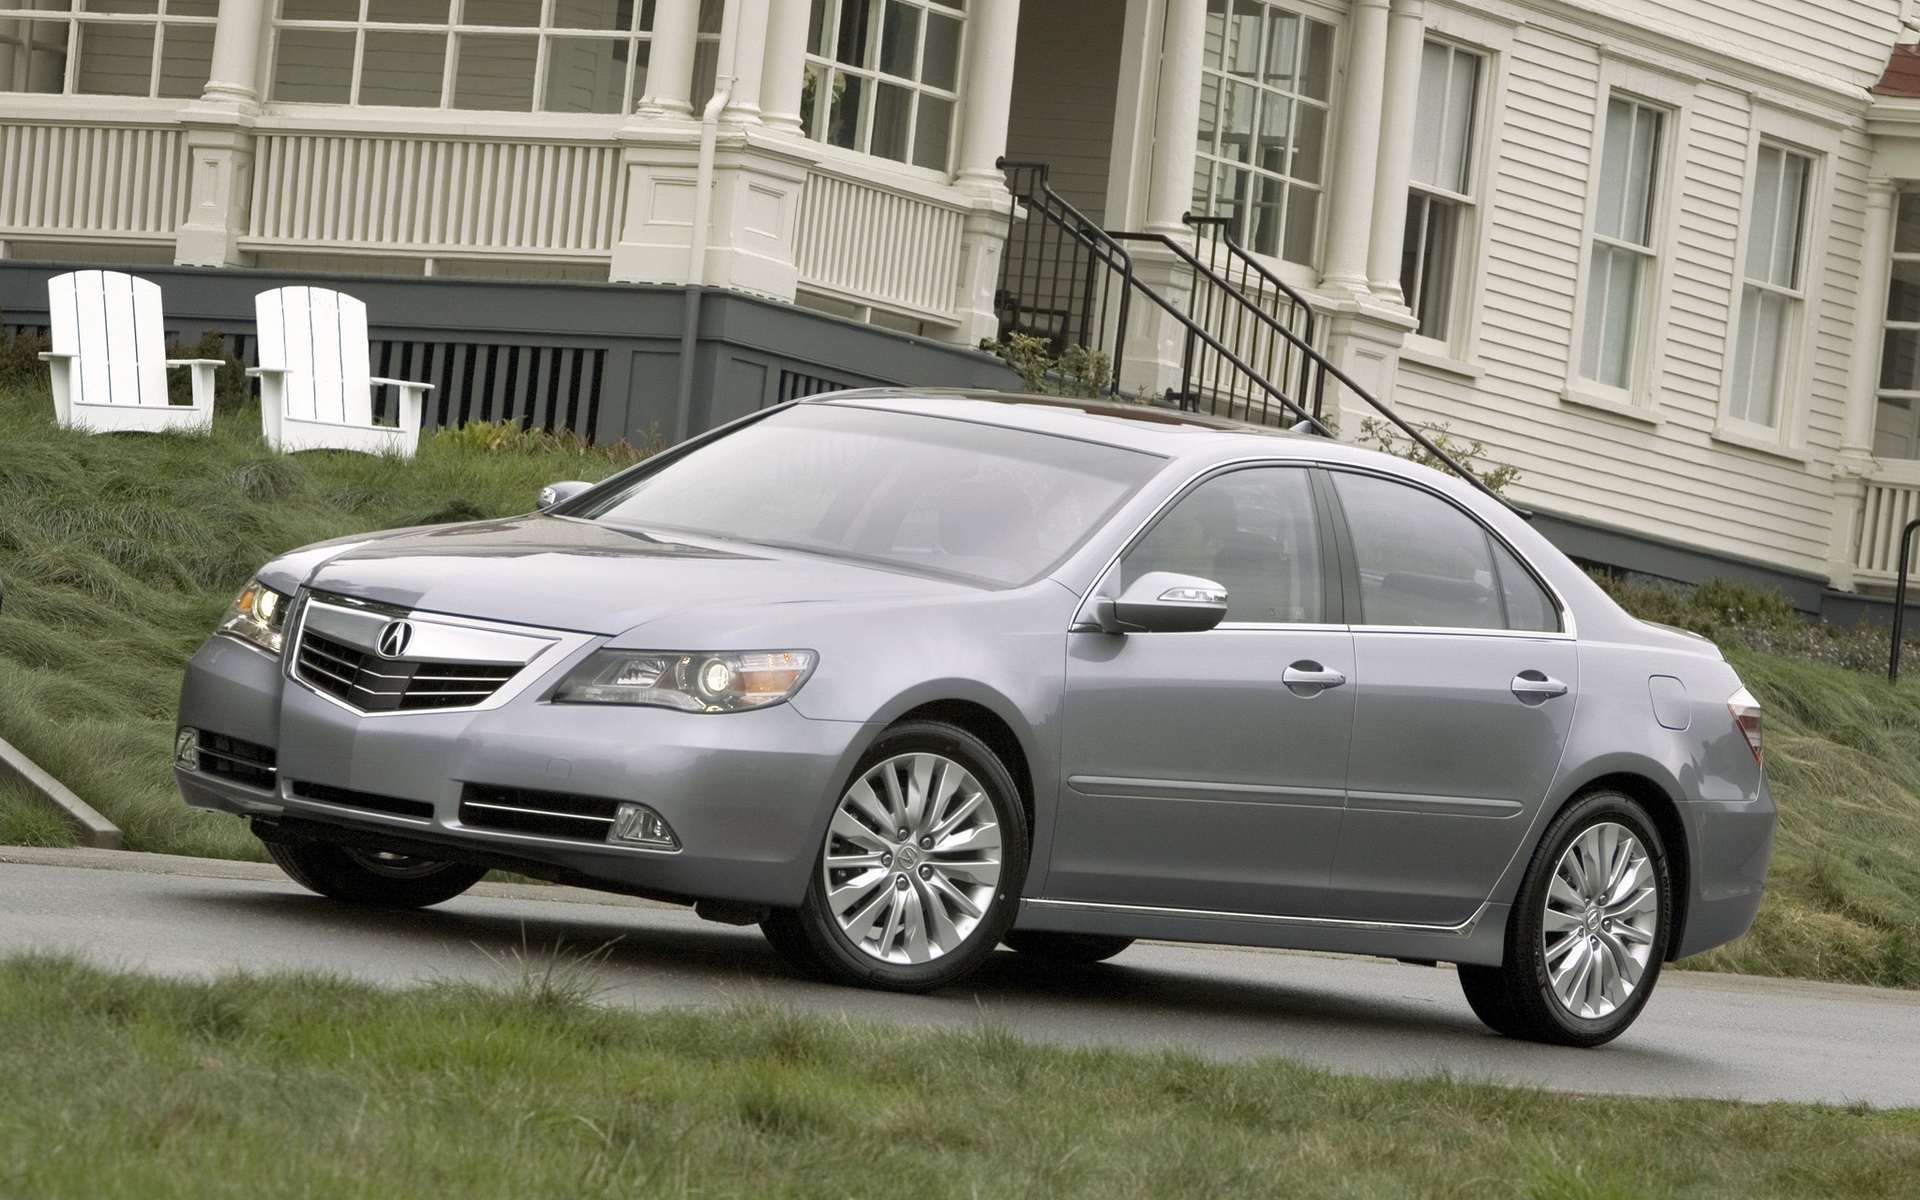 HQ Acura Rl Background Images